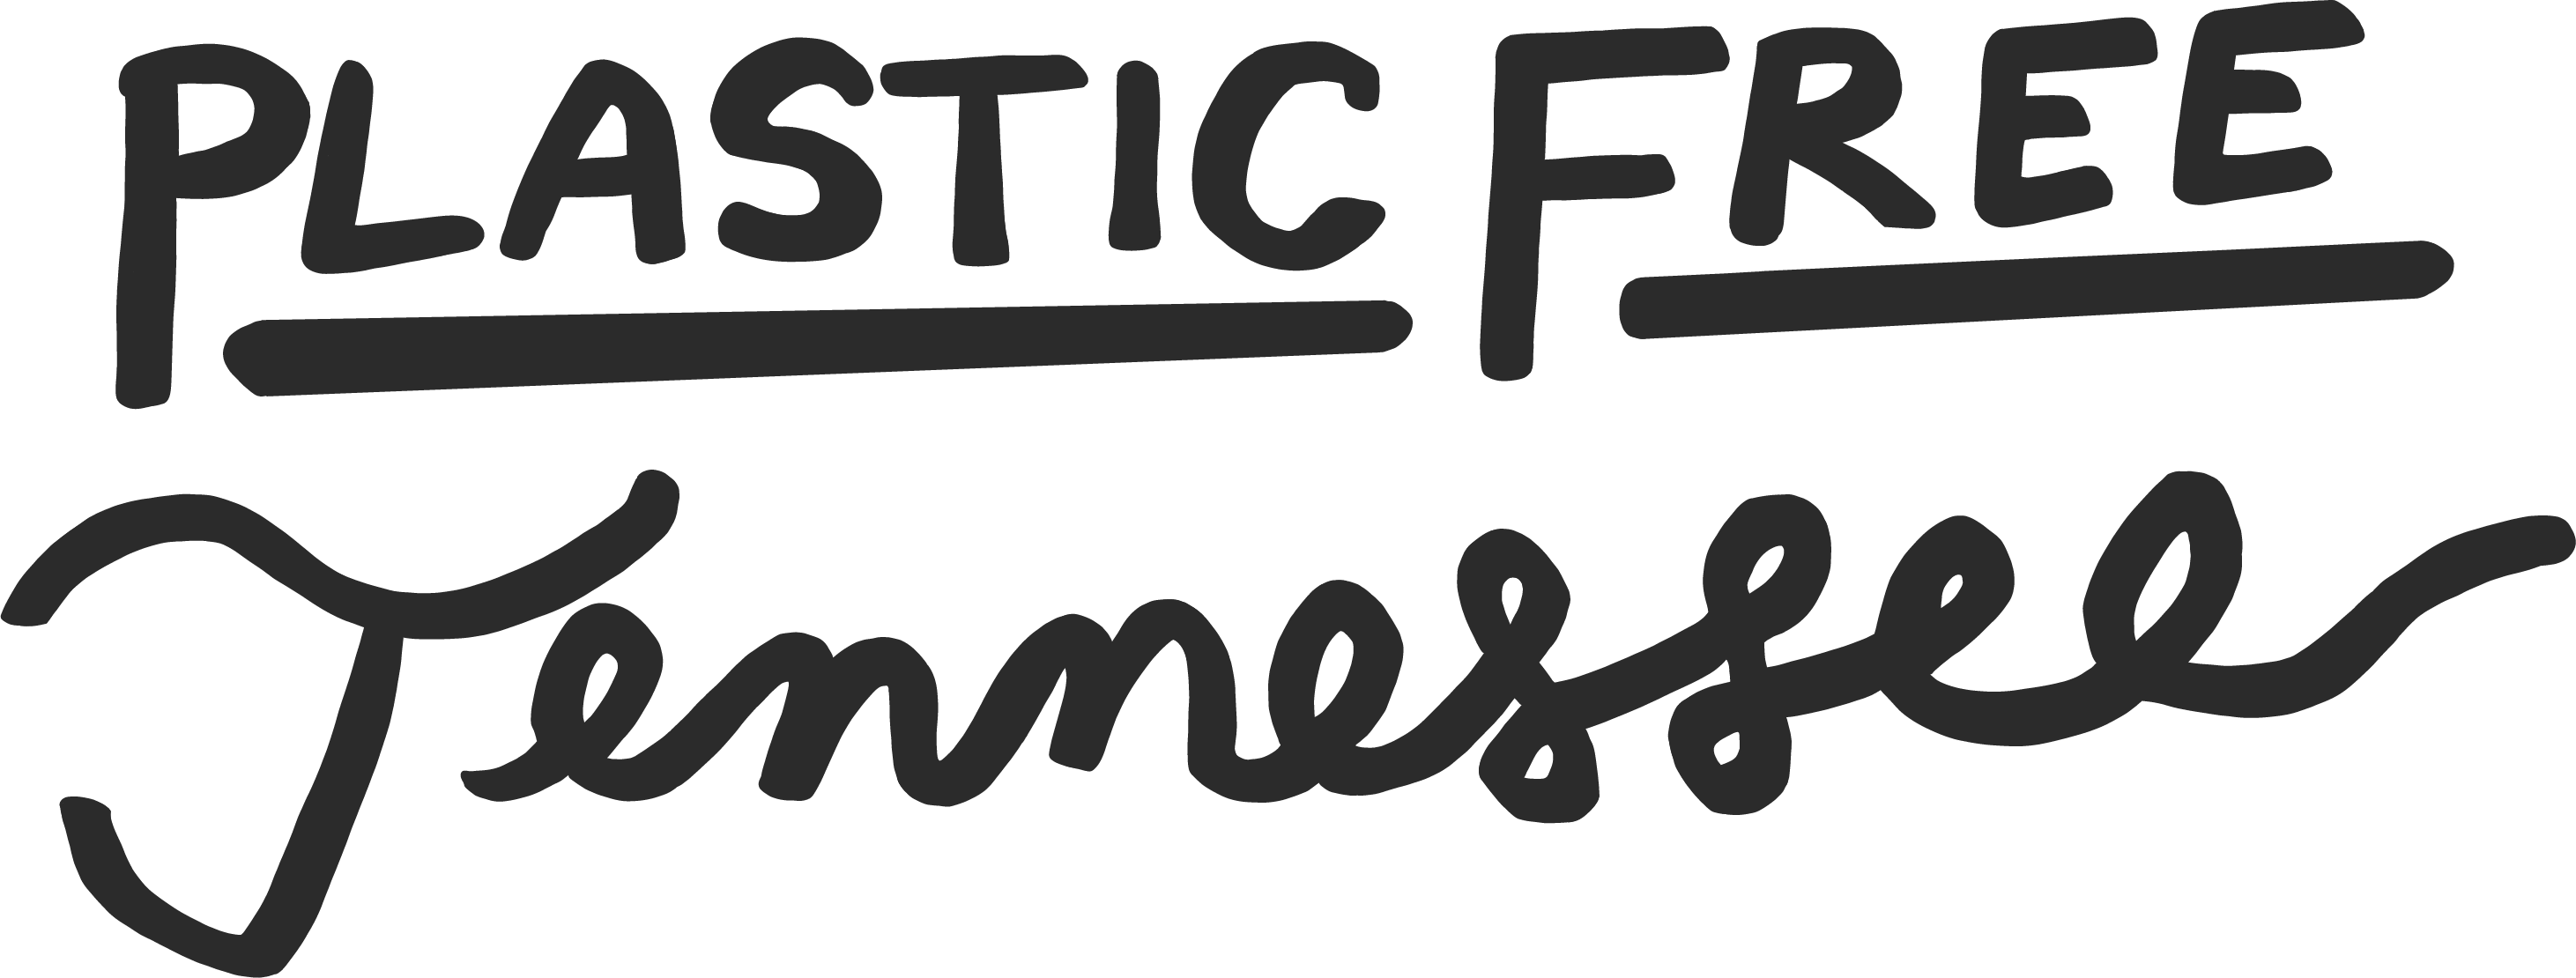 Plastic Free Tennessee Lettering logo design by logo designer Made By Lisa Marie for your inspiration and for the worlds largest logo competition